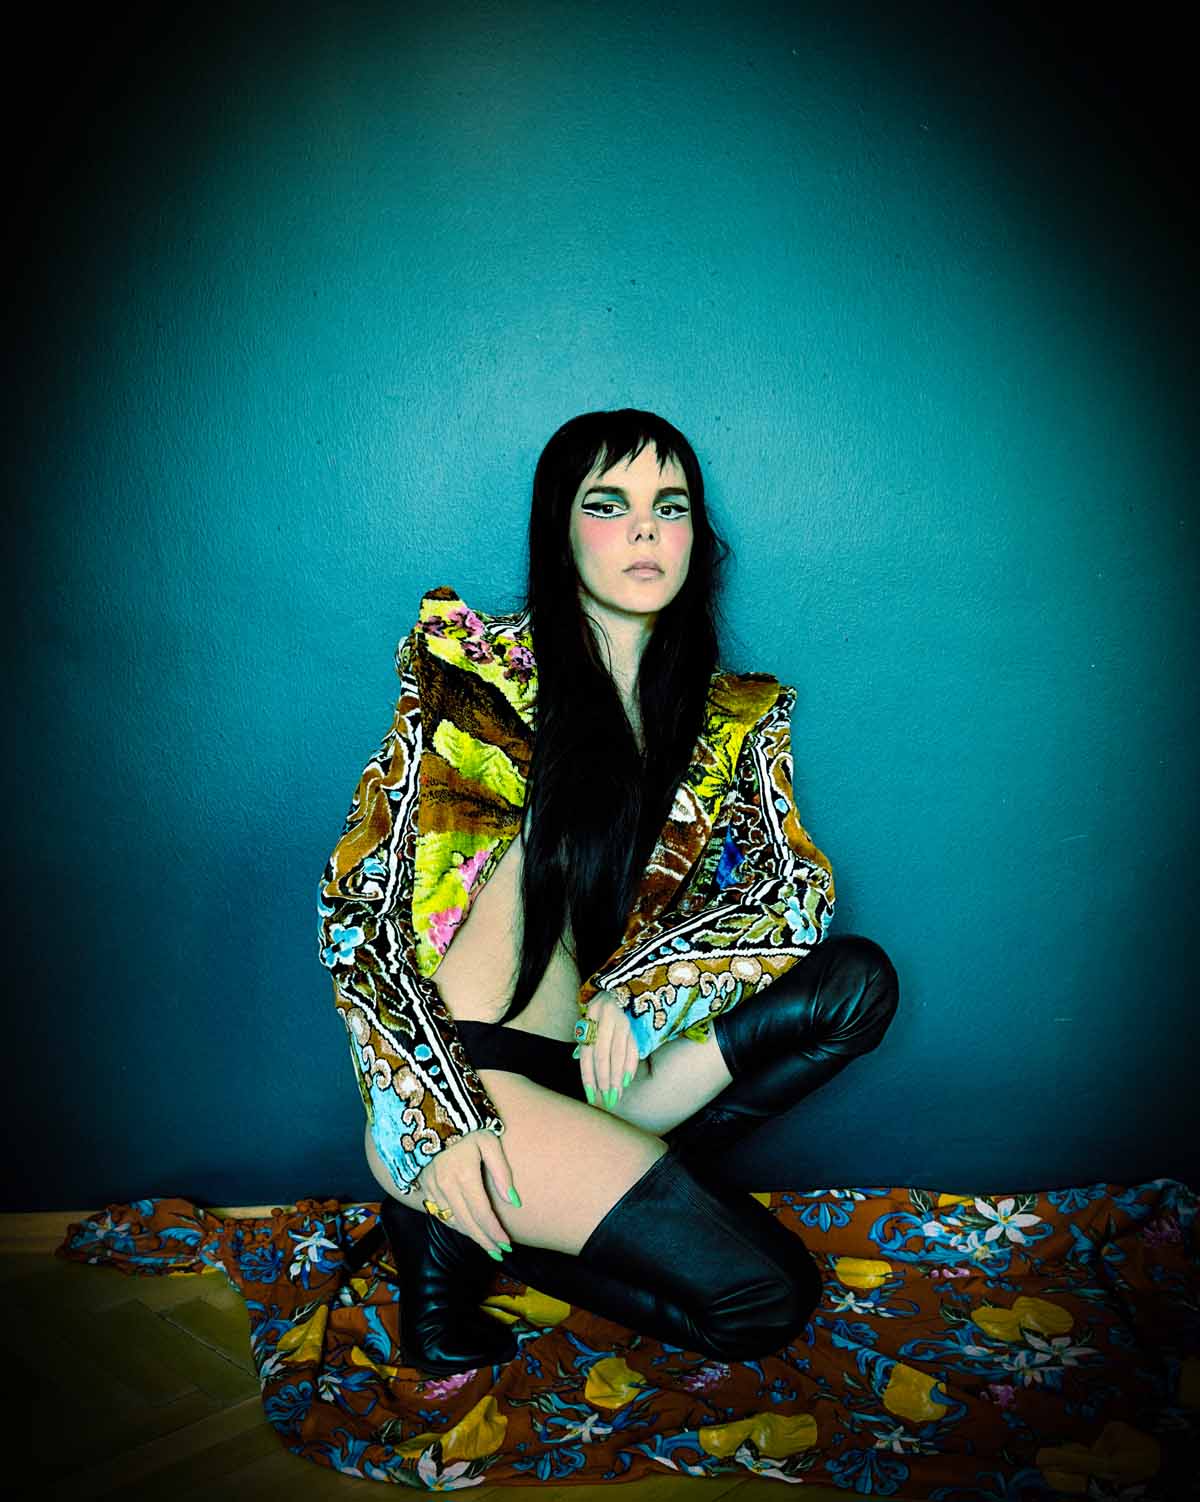 Young woman dressed in black panties, black overknee boots and a colourful, wildly patterned blazer squats in front of a turquoise wall on a flower-printed fabric. Gaye Su Akyol's long black hair covers her upper body, which is seemingly naked under the jacket. Her eyes are strikingly made up, she wears long poison green fingernails and looks serious into the camera.